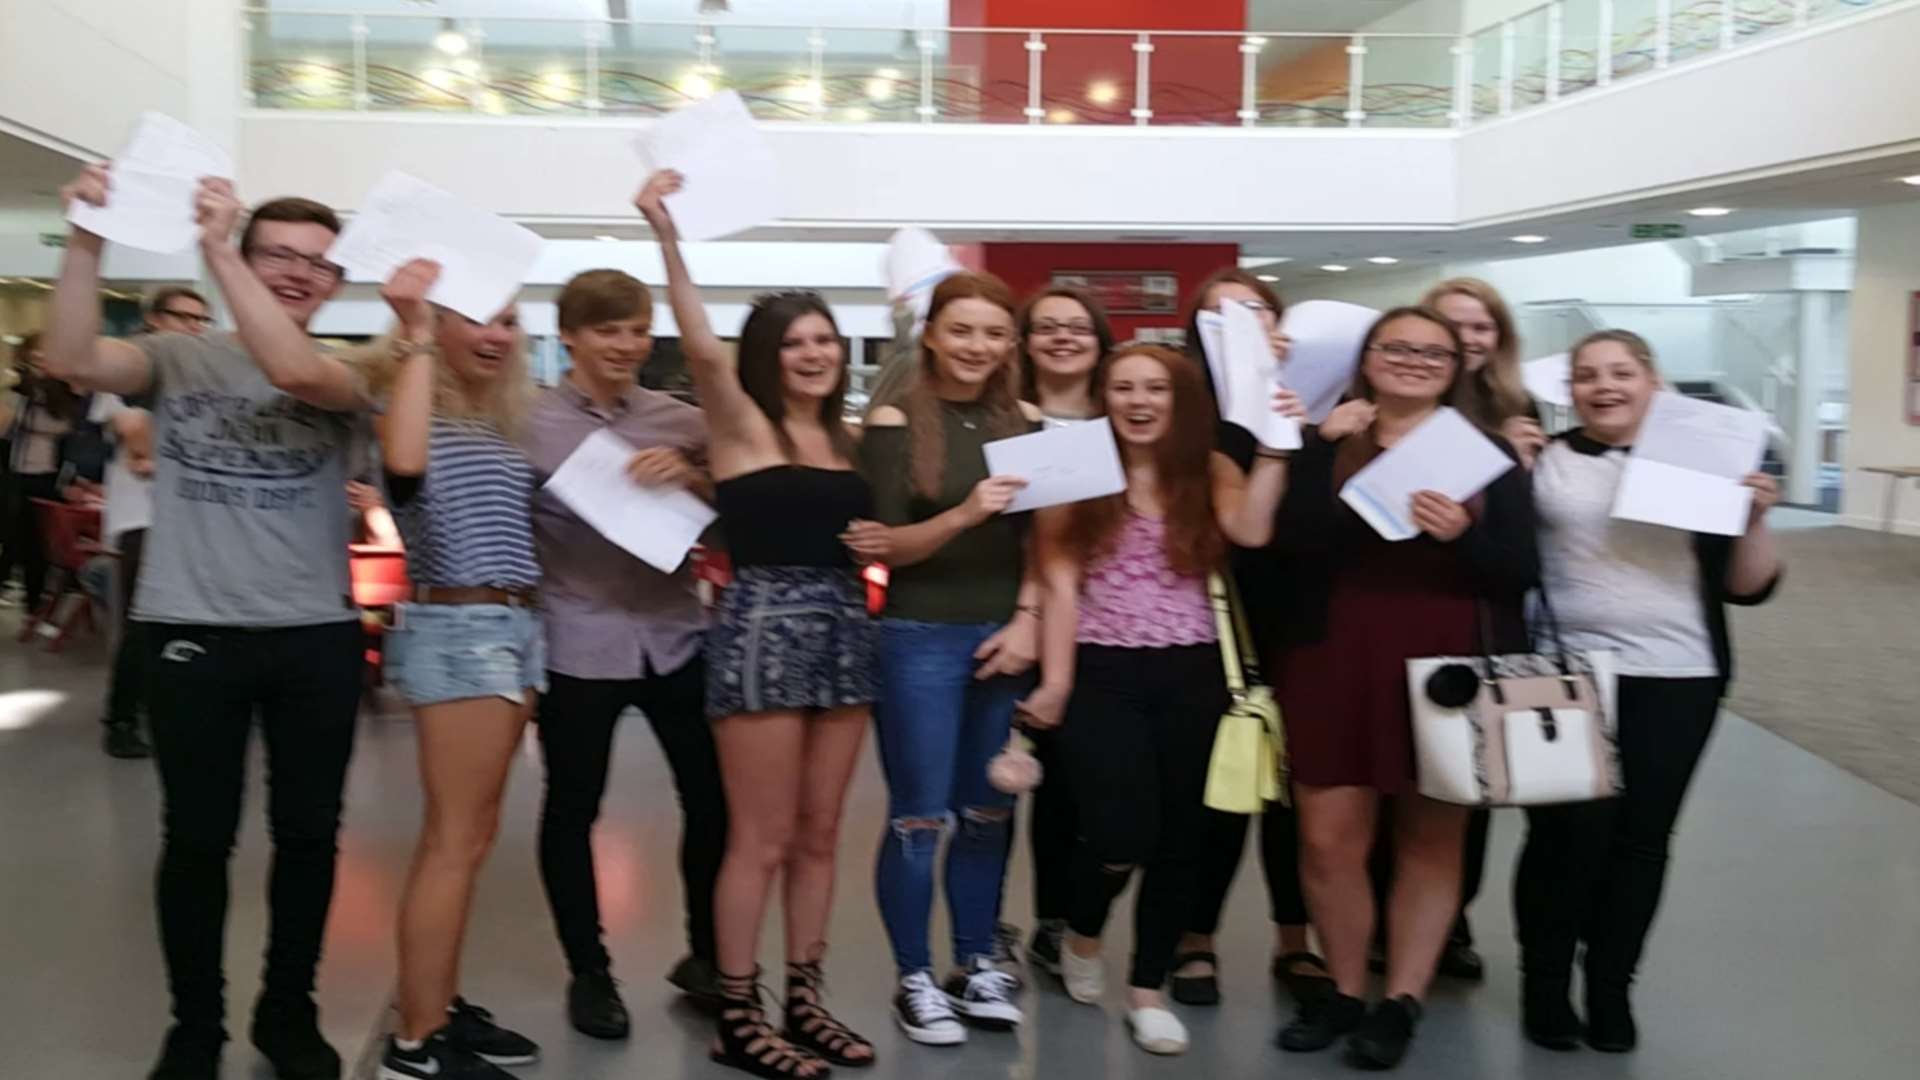 Students at St George's Foundation School celebrate their A-level results